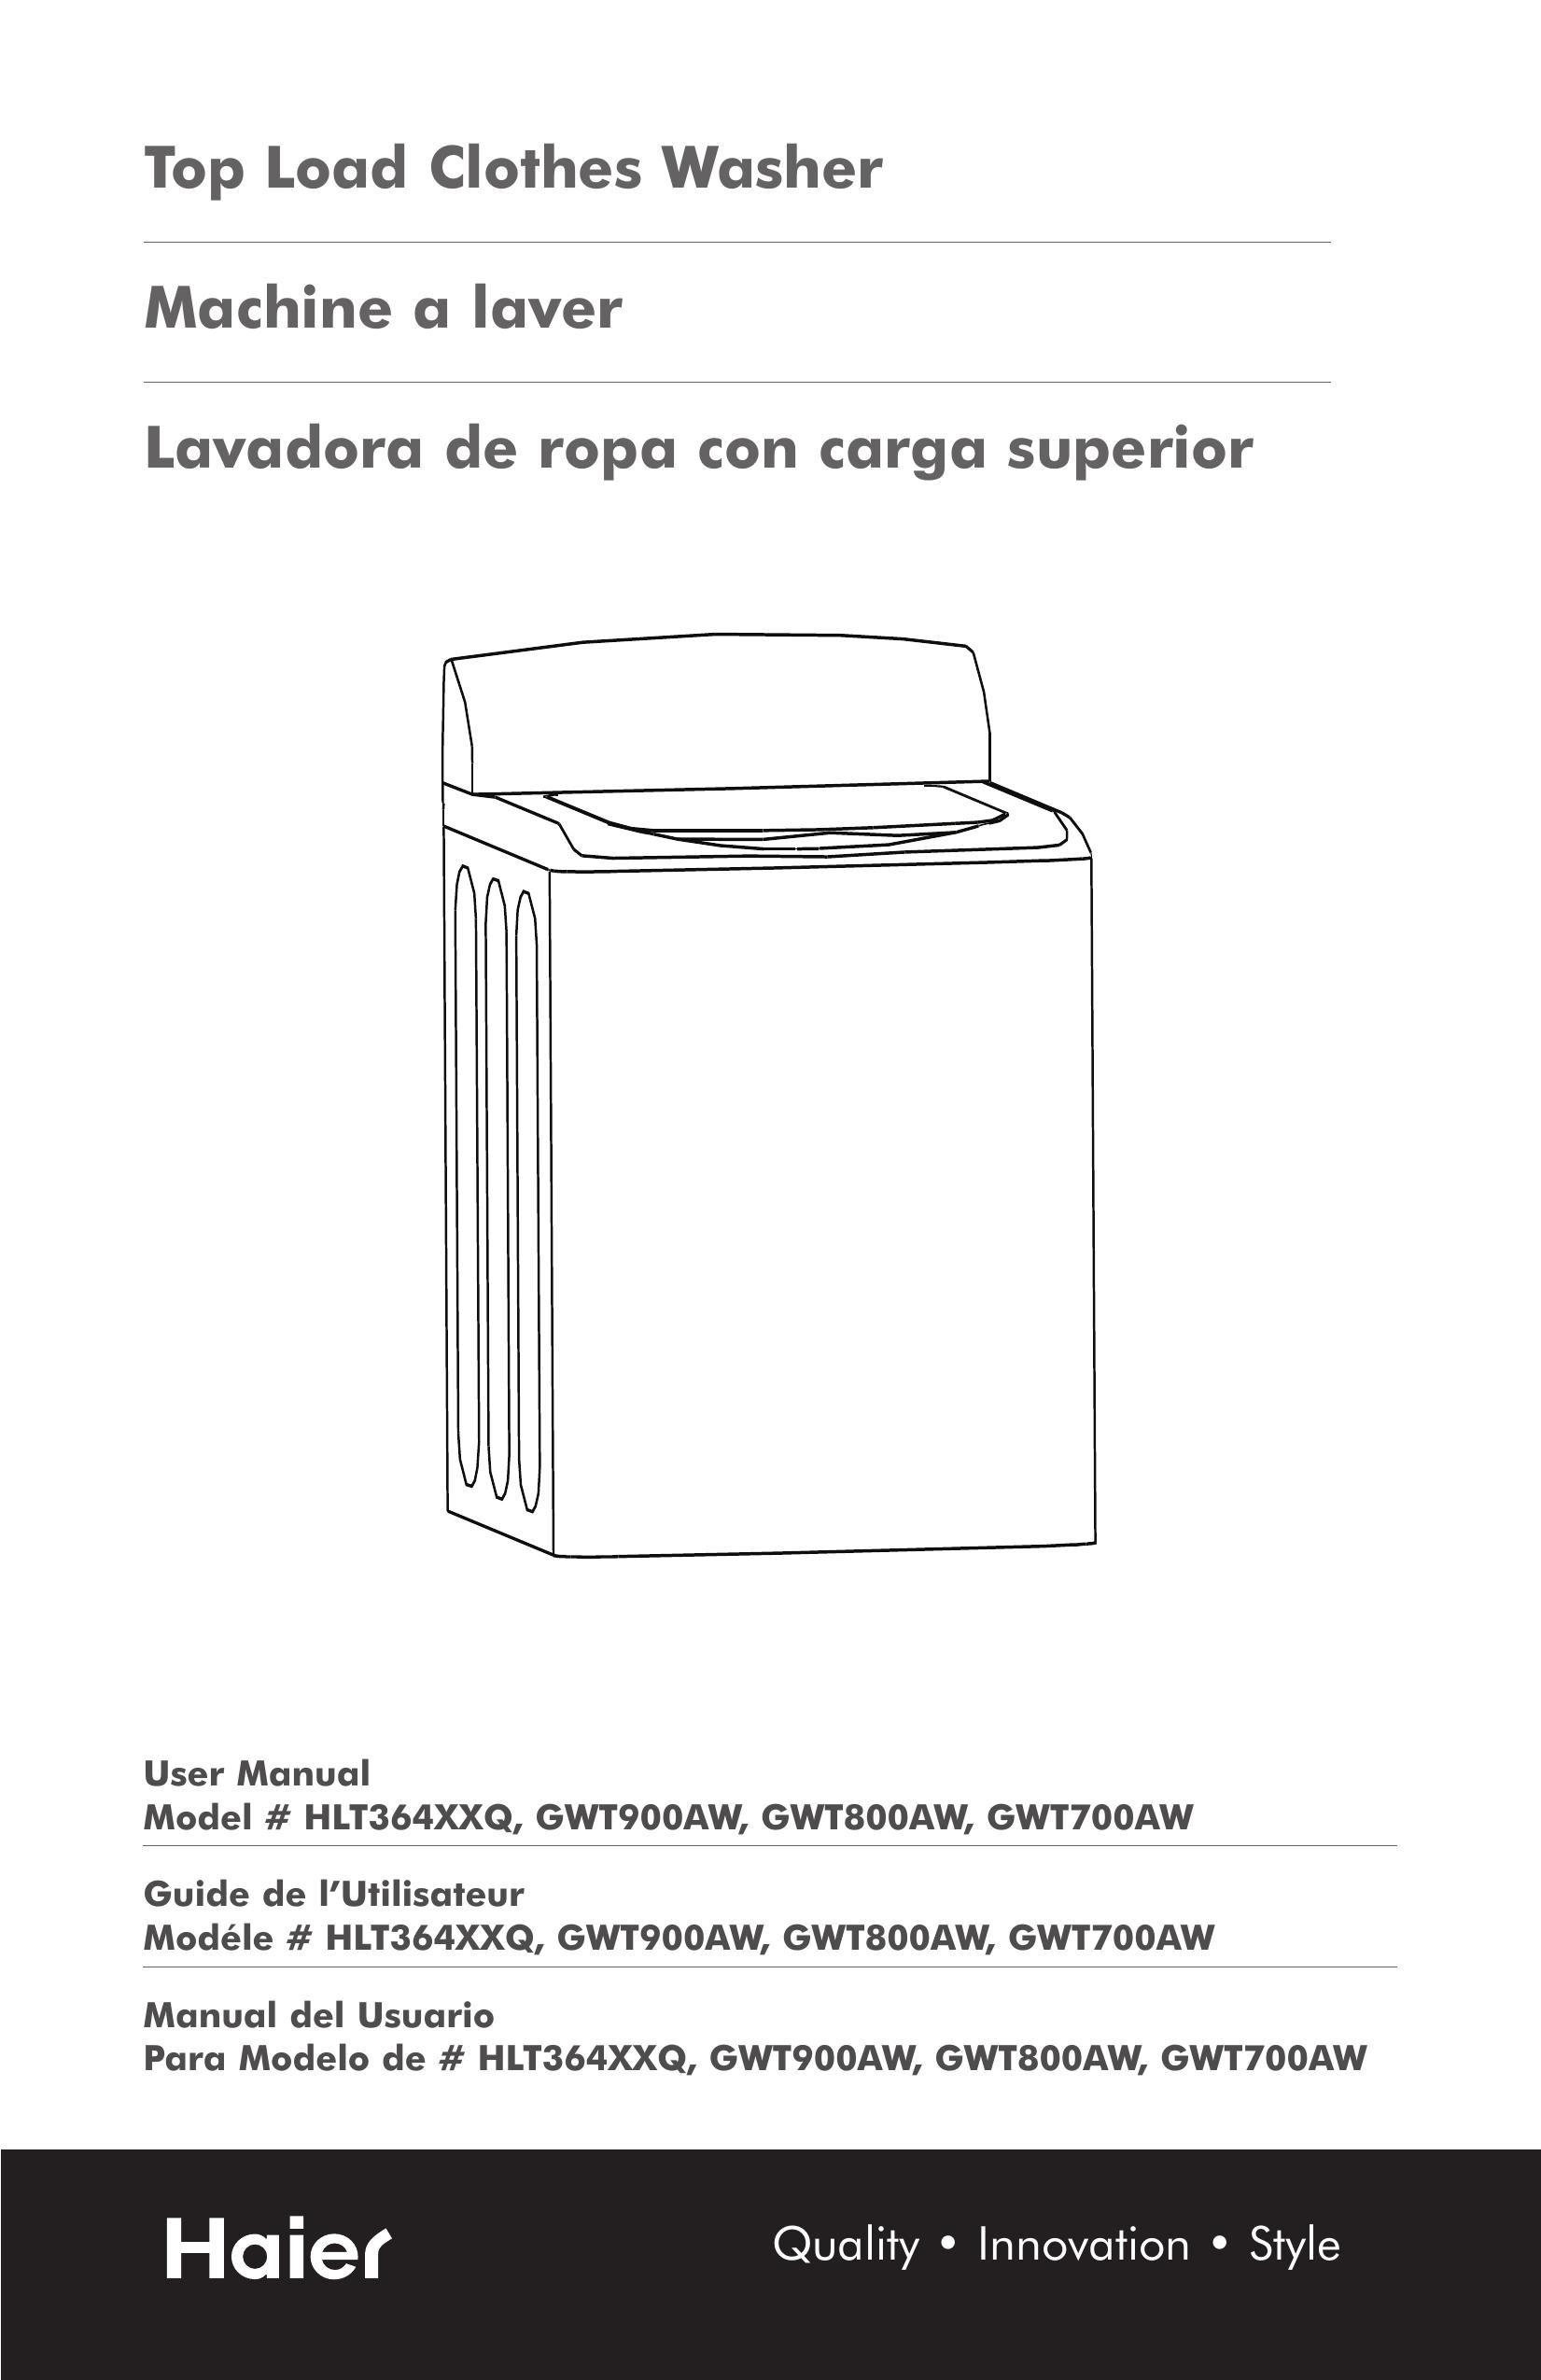 Haier GWT800AW Washer User Manual